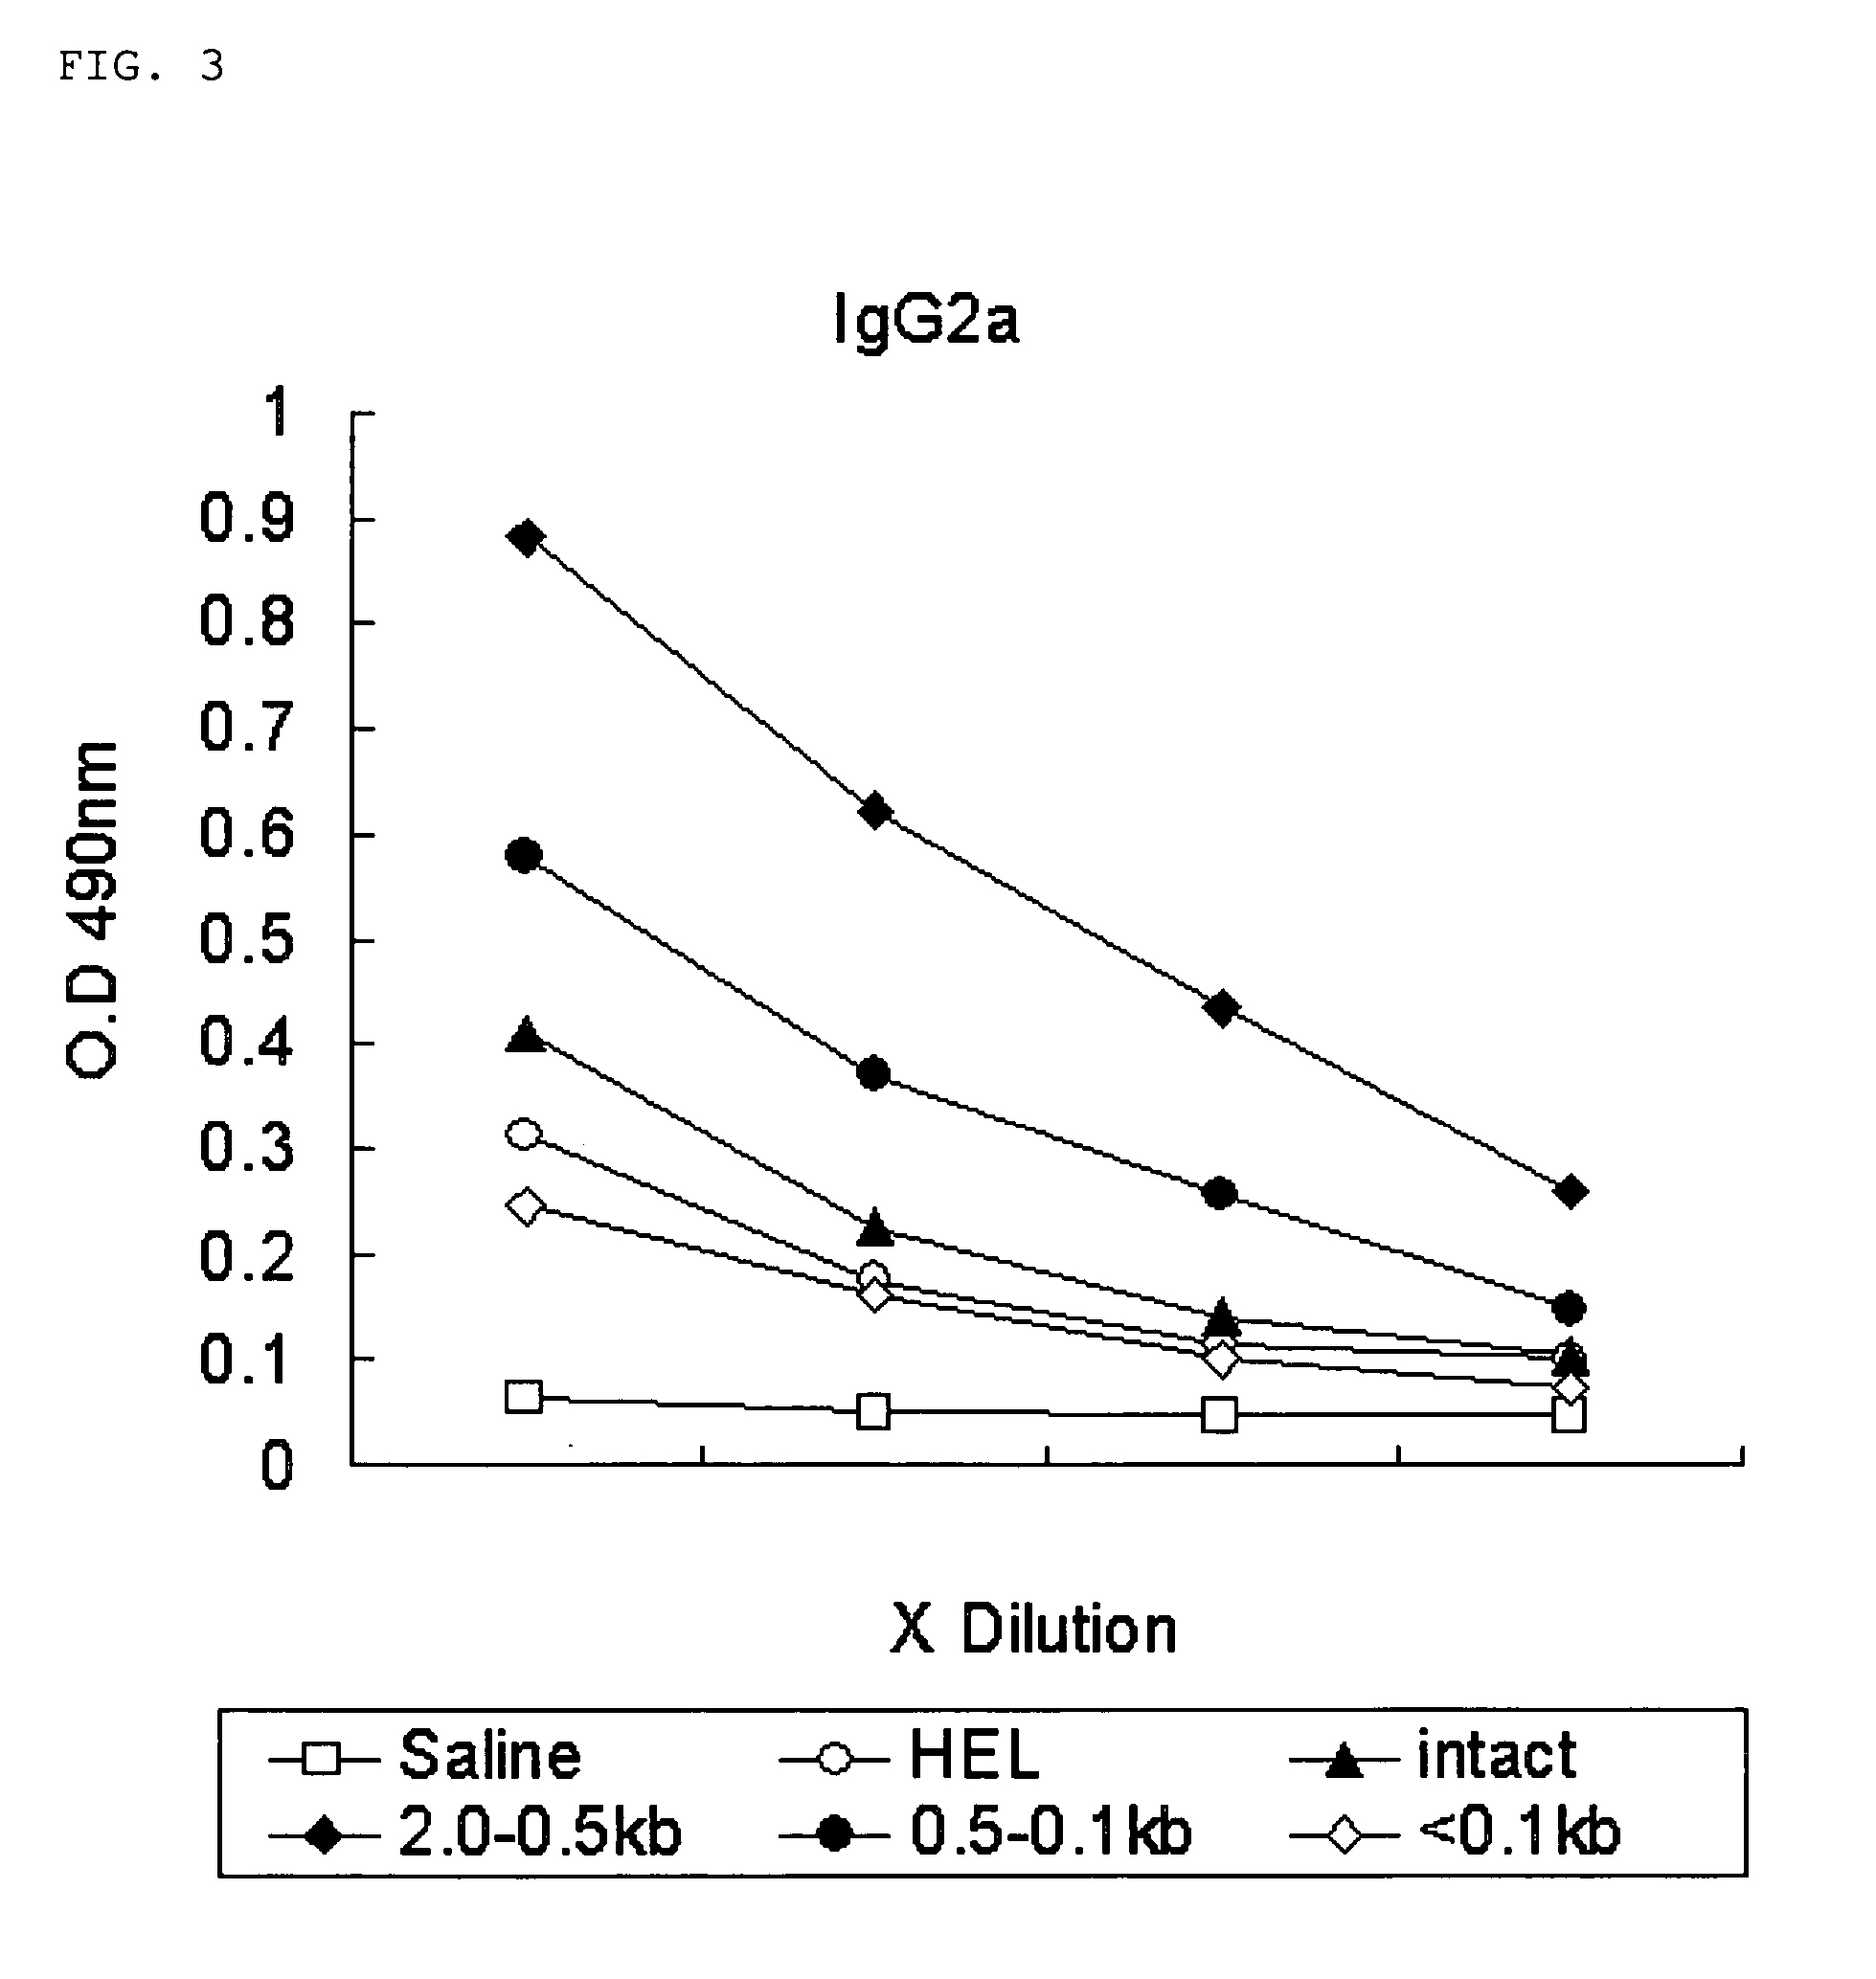 Immune stimulating composition comprising bacterial chromosomal DNA fragments having methylated CpG sequences and non-toxic lipopolysaccharides